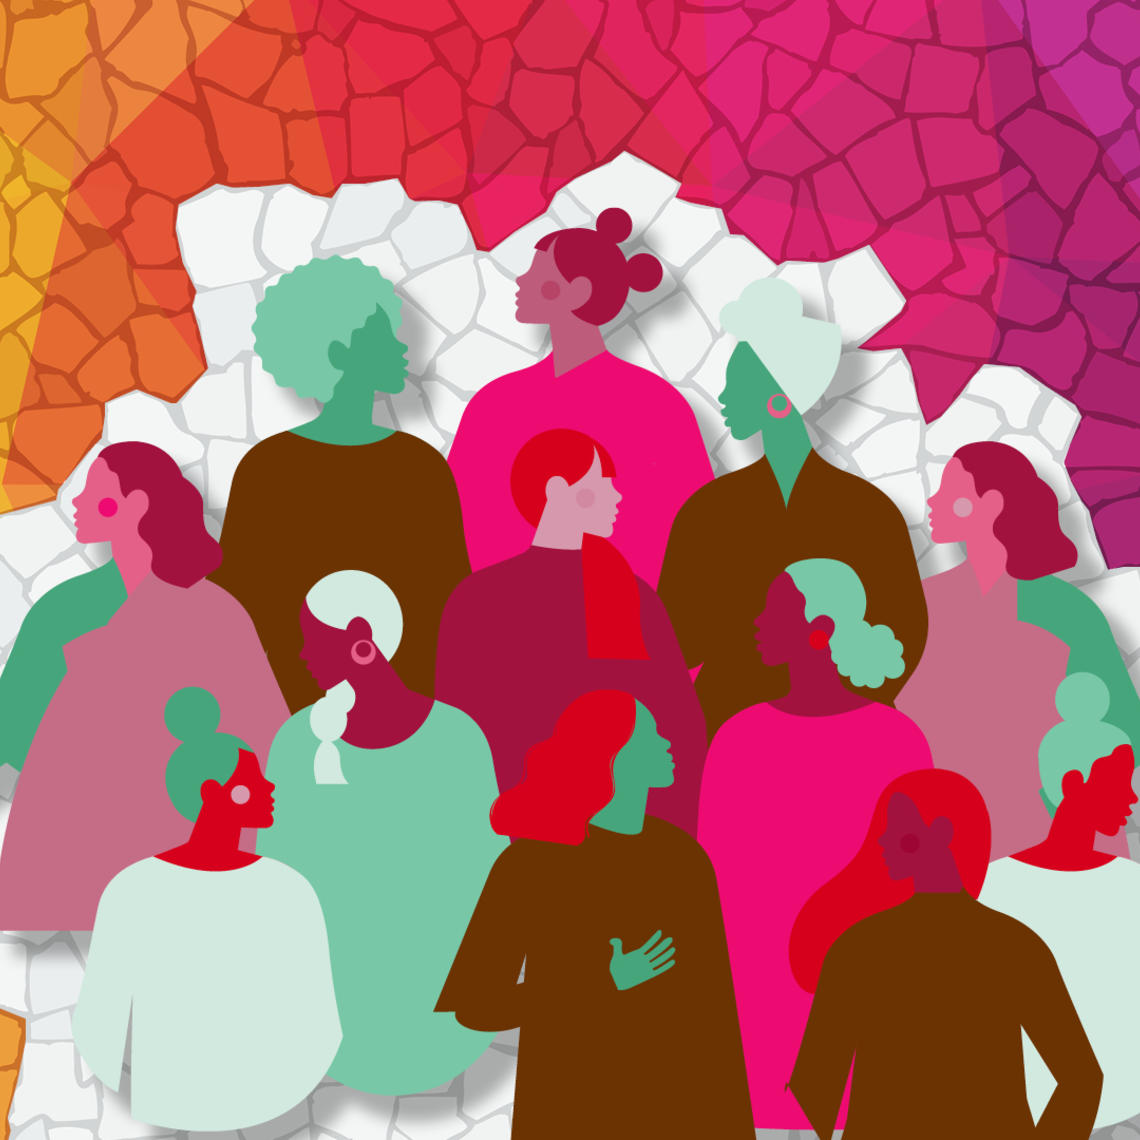 A colorful graphic of diverse people